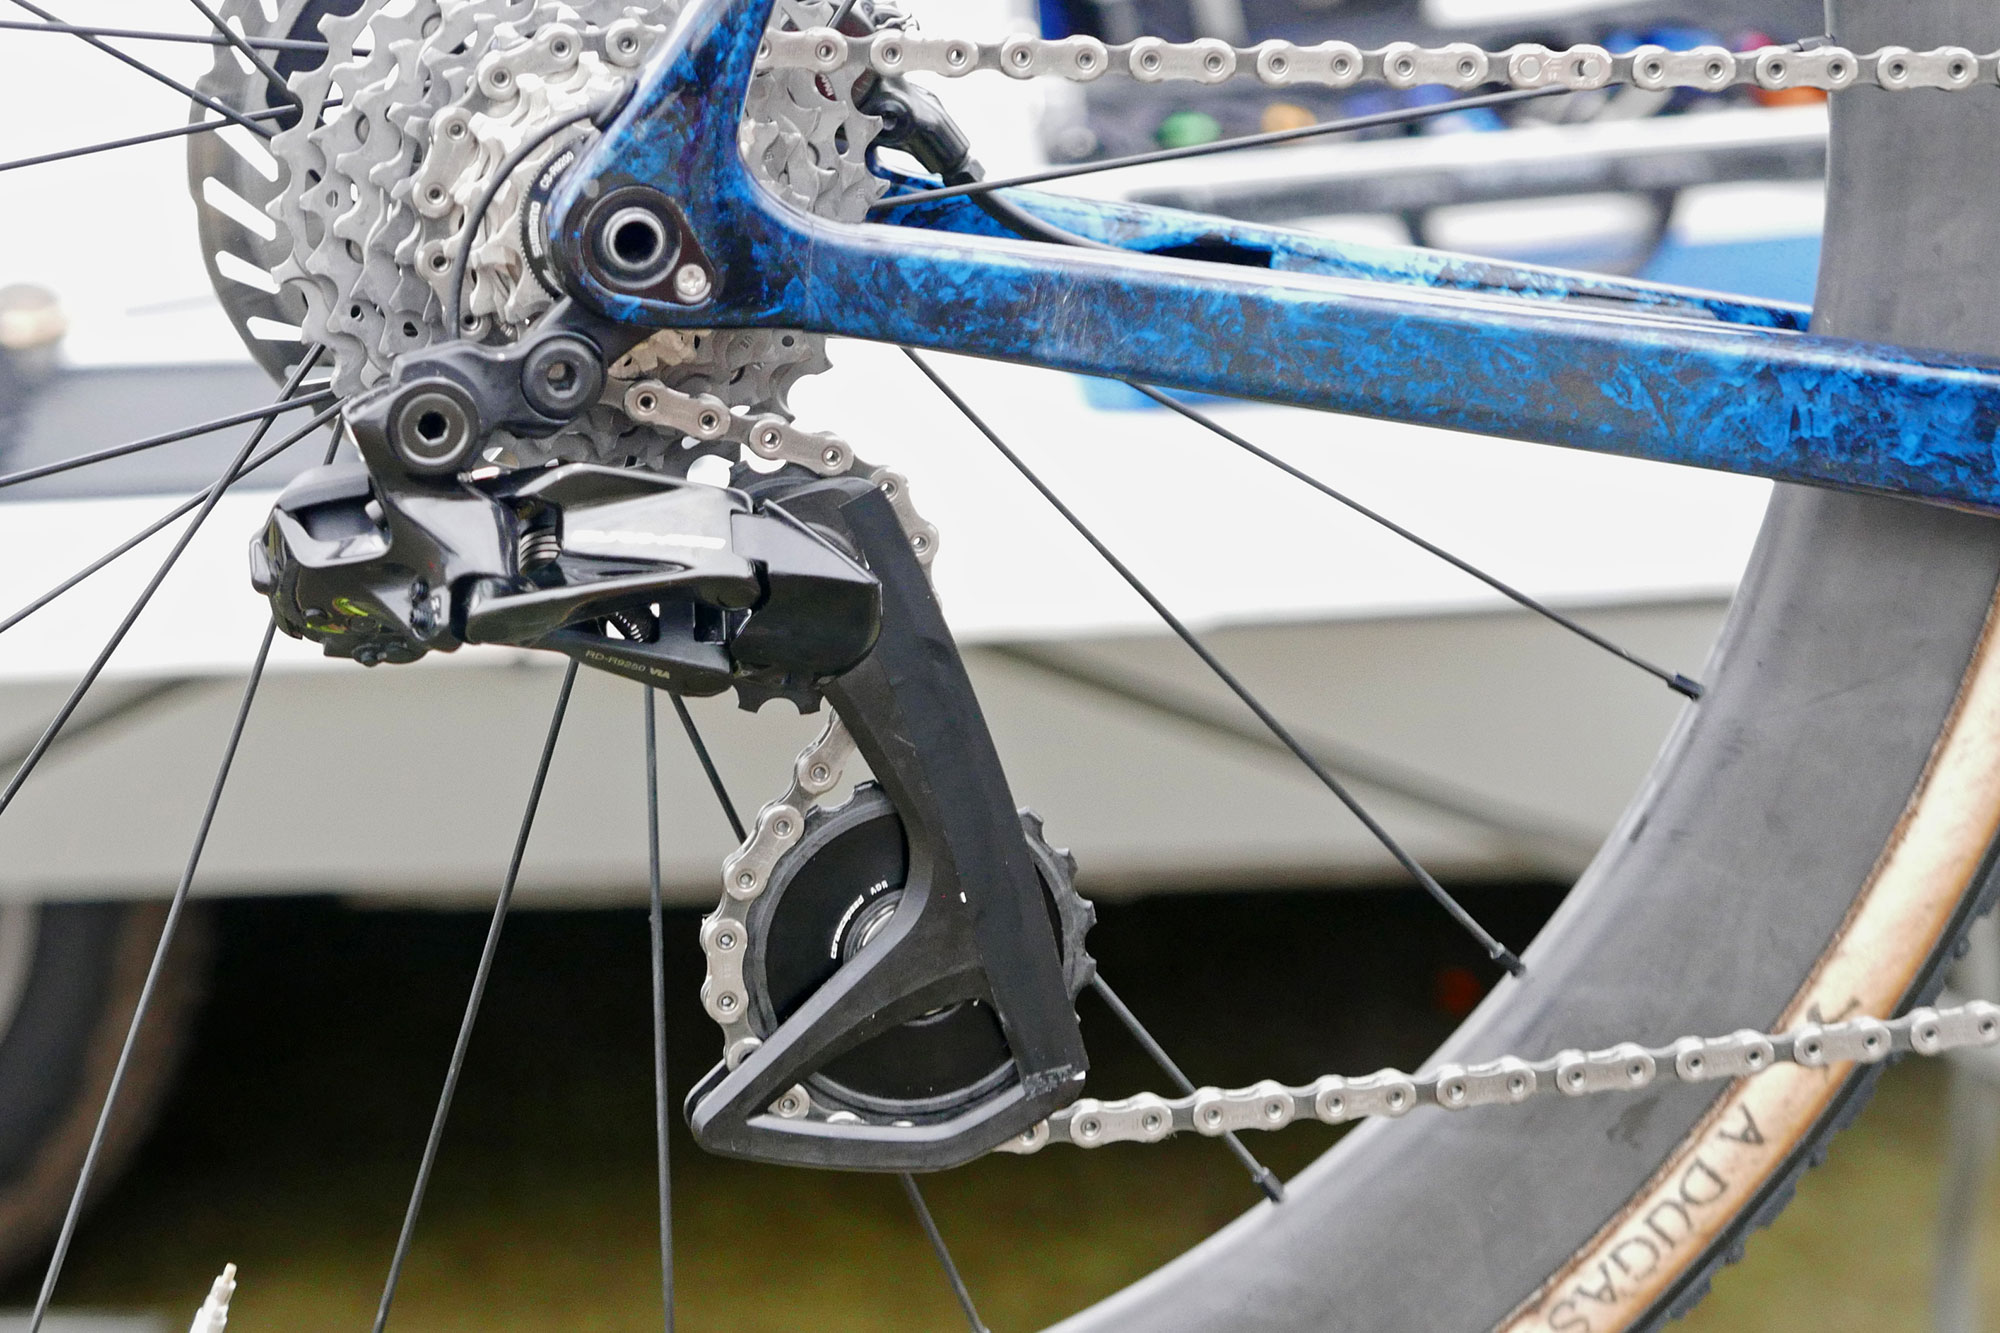 Prototype updated CeramicSpeed OSPW for Shimano Di2, up close at CX Worlds